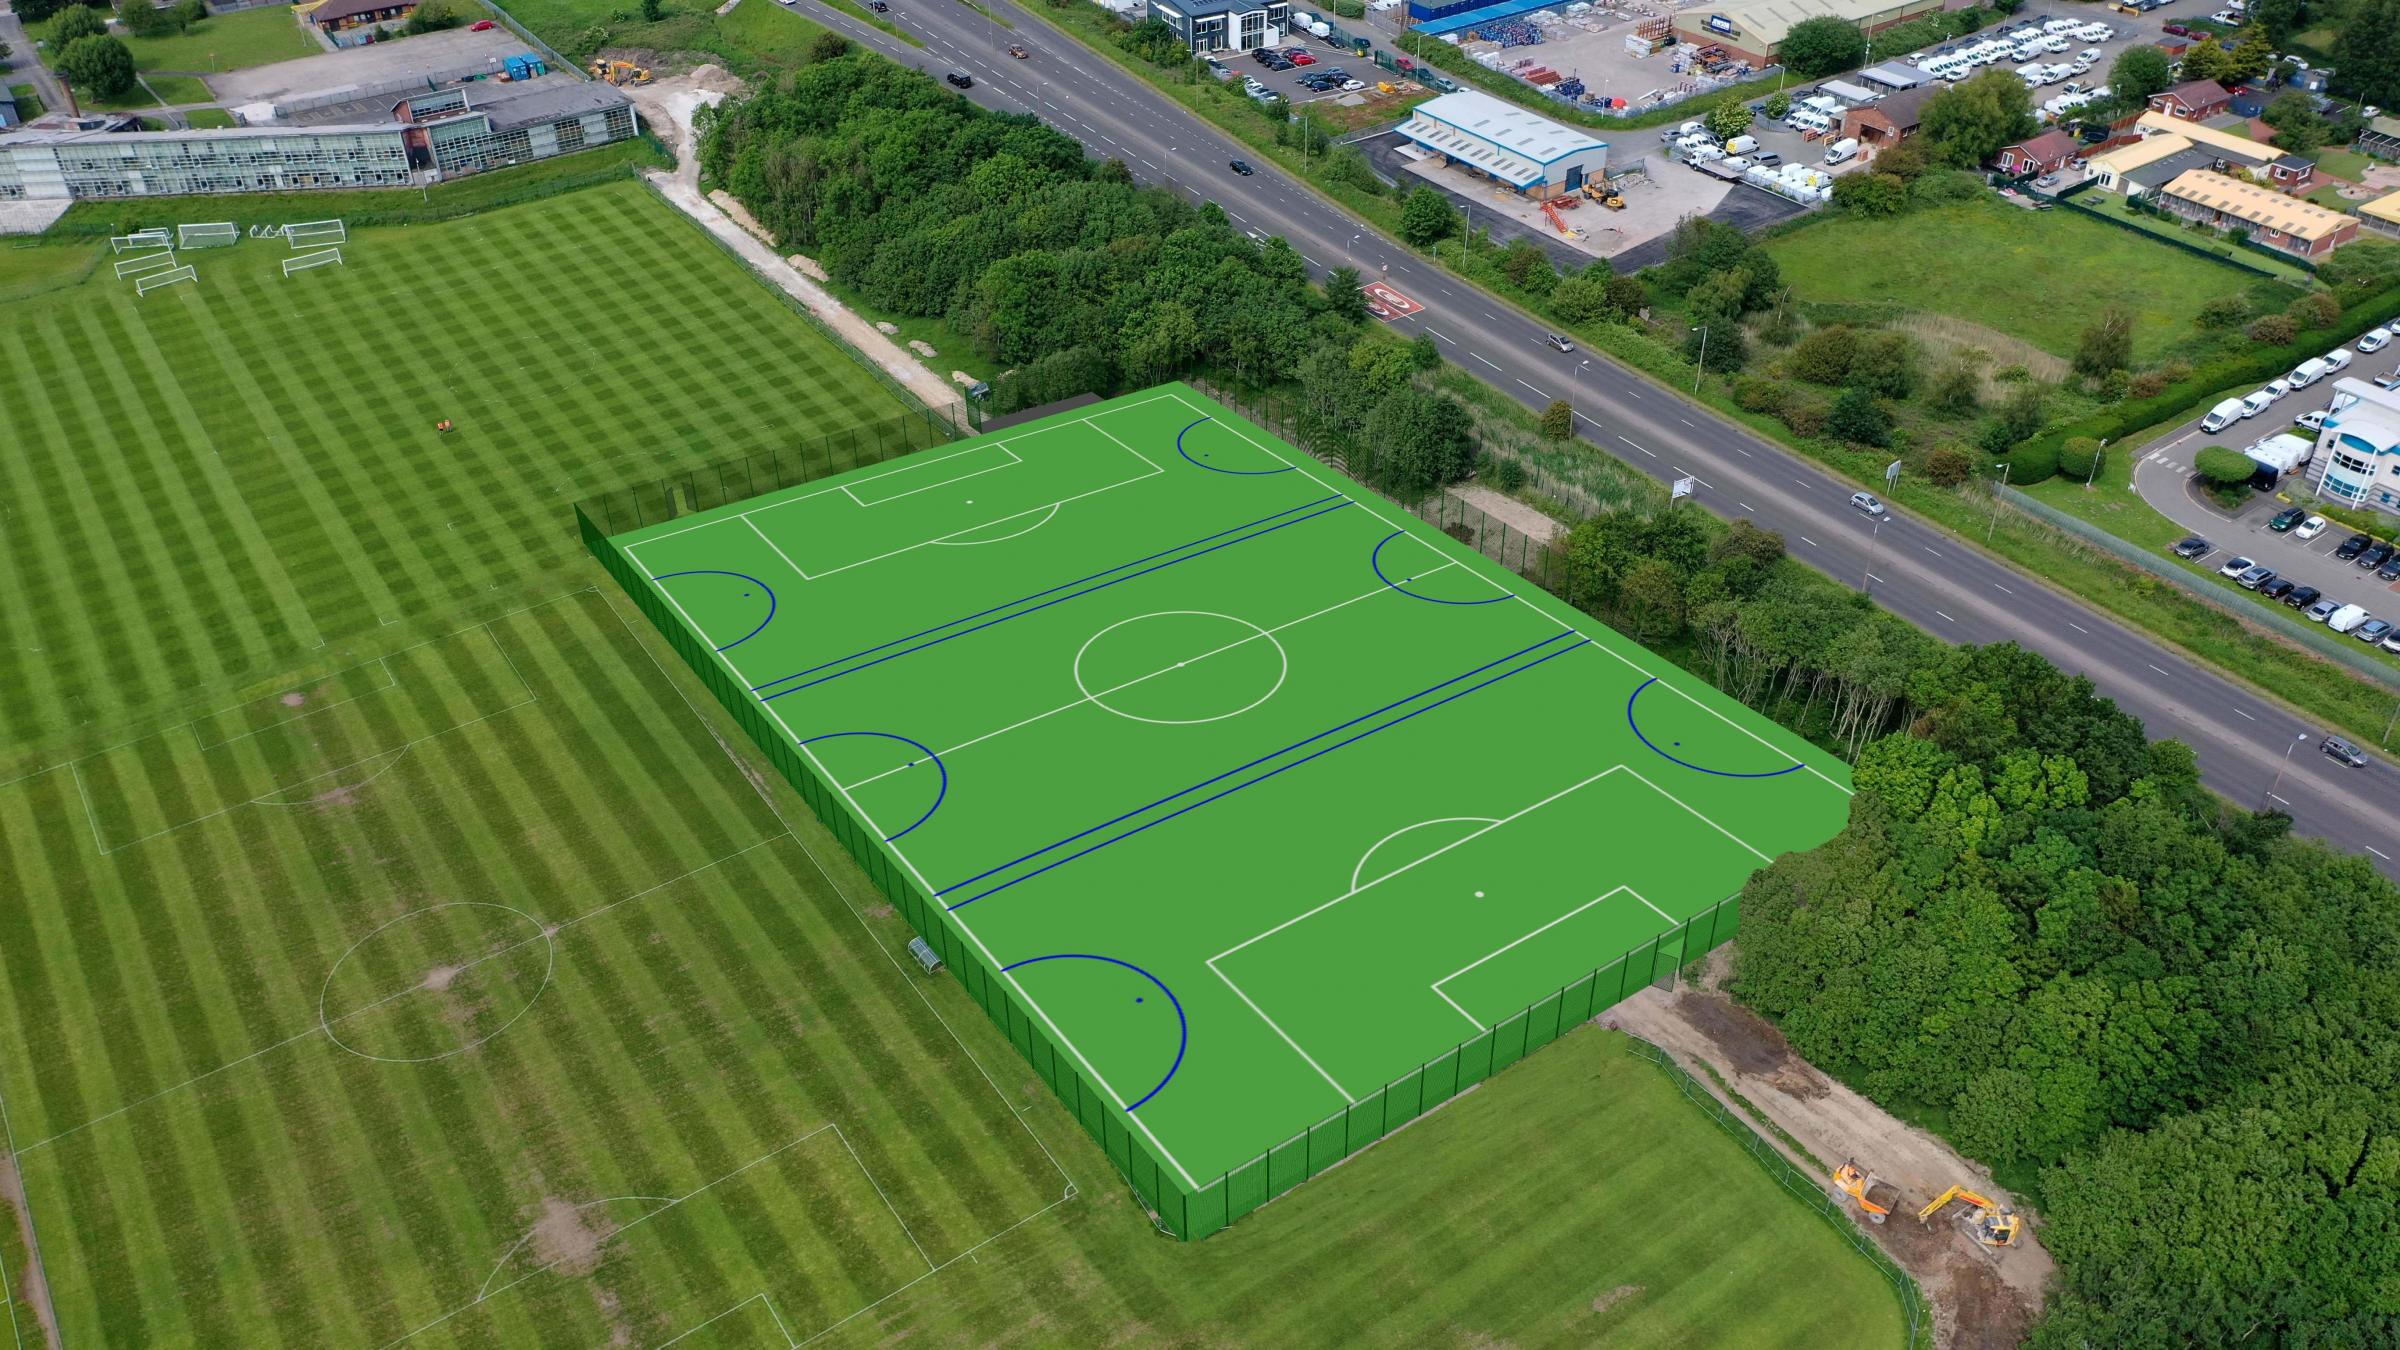 An artists impression of how the pitch will look once completed